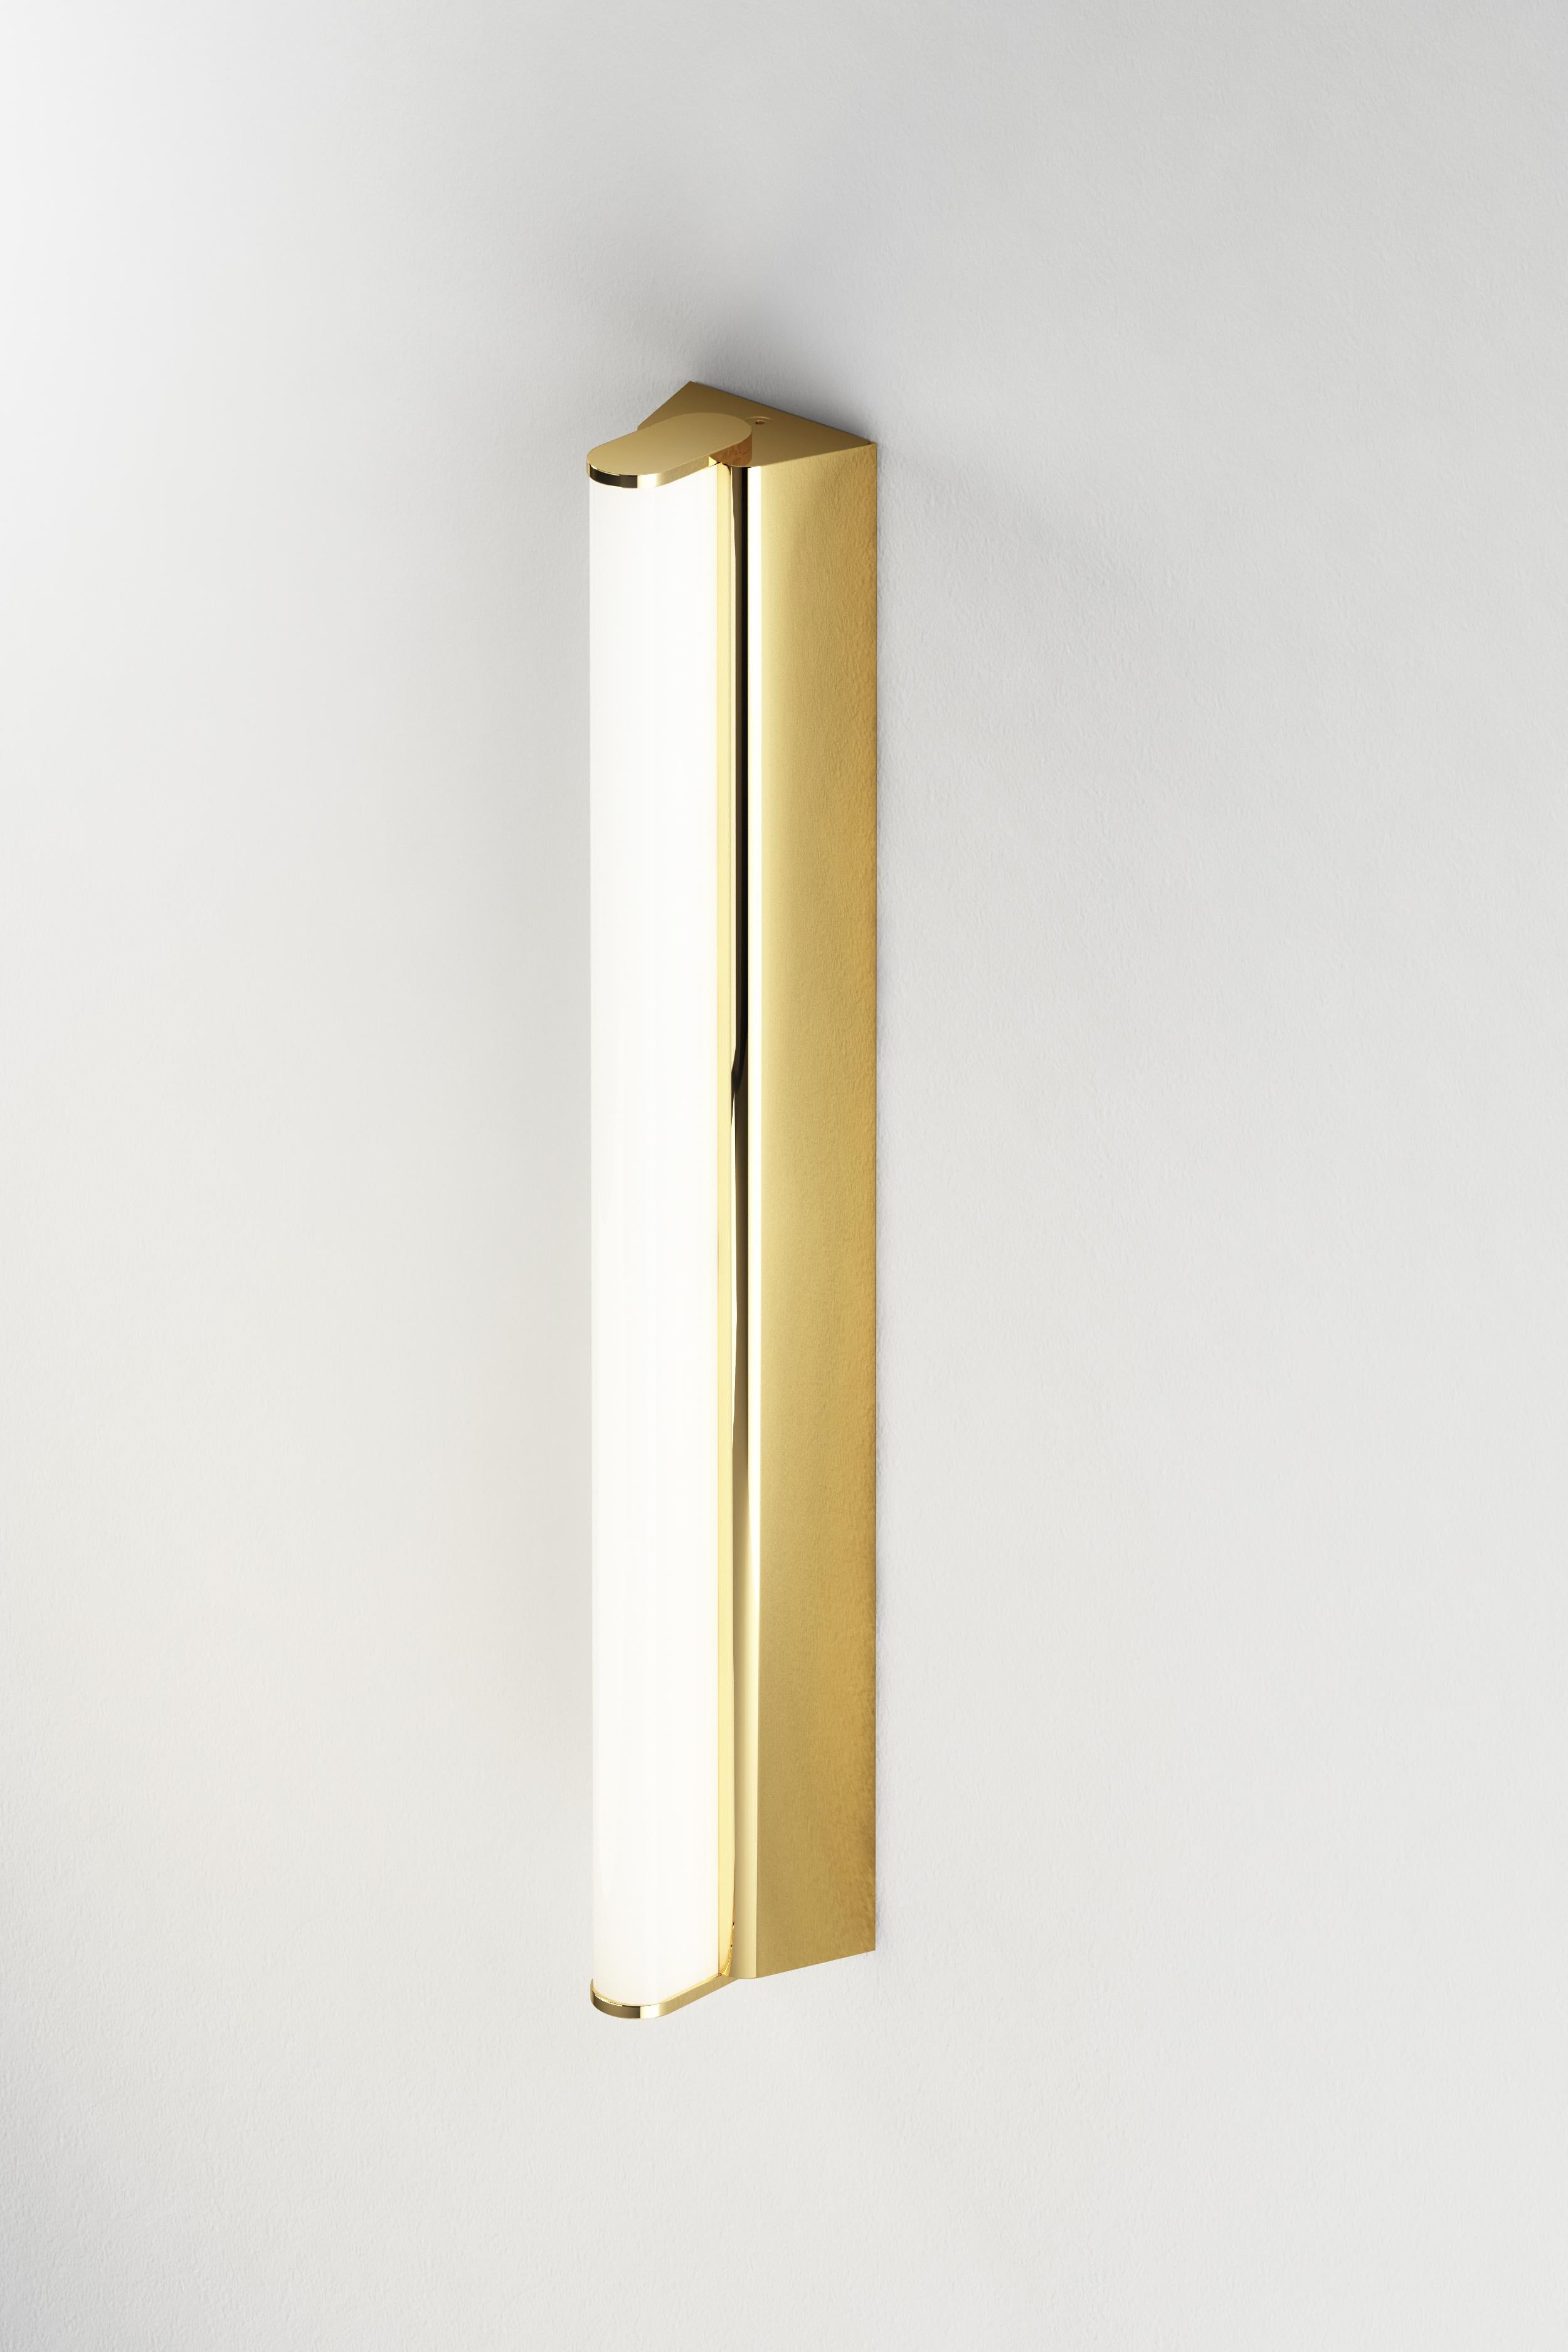 IP Metrop 325 Polished brass wall light by Emilie Cathelineau
Dimensions: D32.5 x W5 X H4.5 cm
Materials: Solid brass, Polished Brass, LED, Polycarbonate.
Others finishes and dimensions are available.

All our lamps can be wired according to